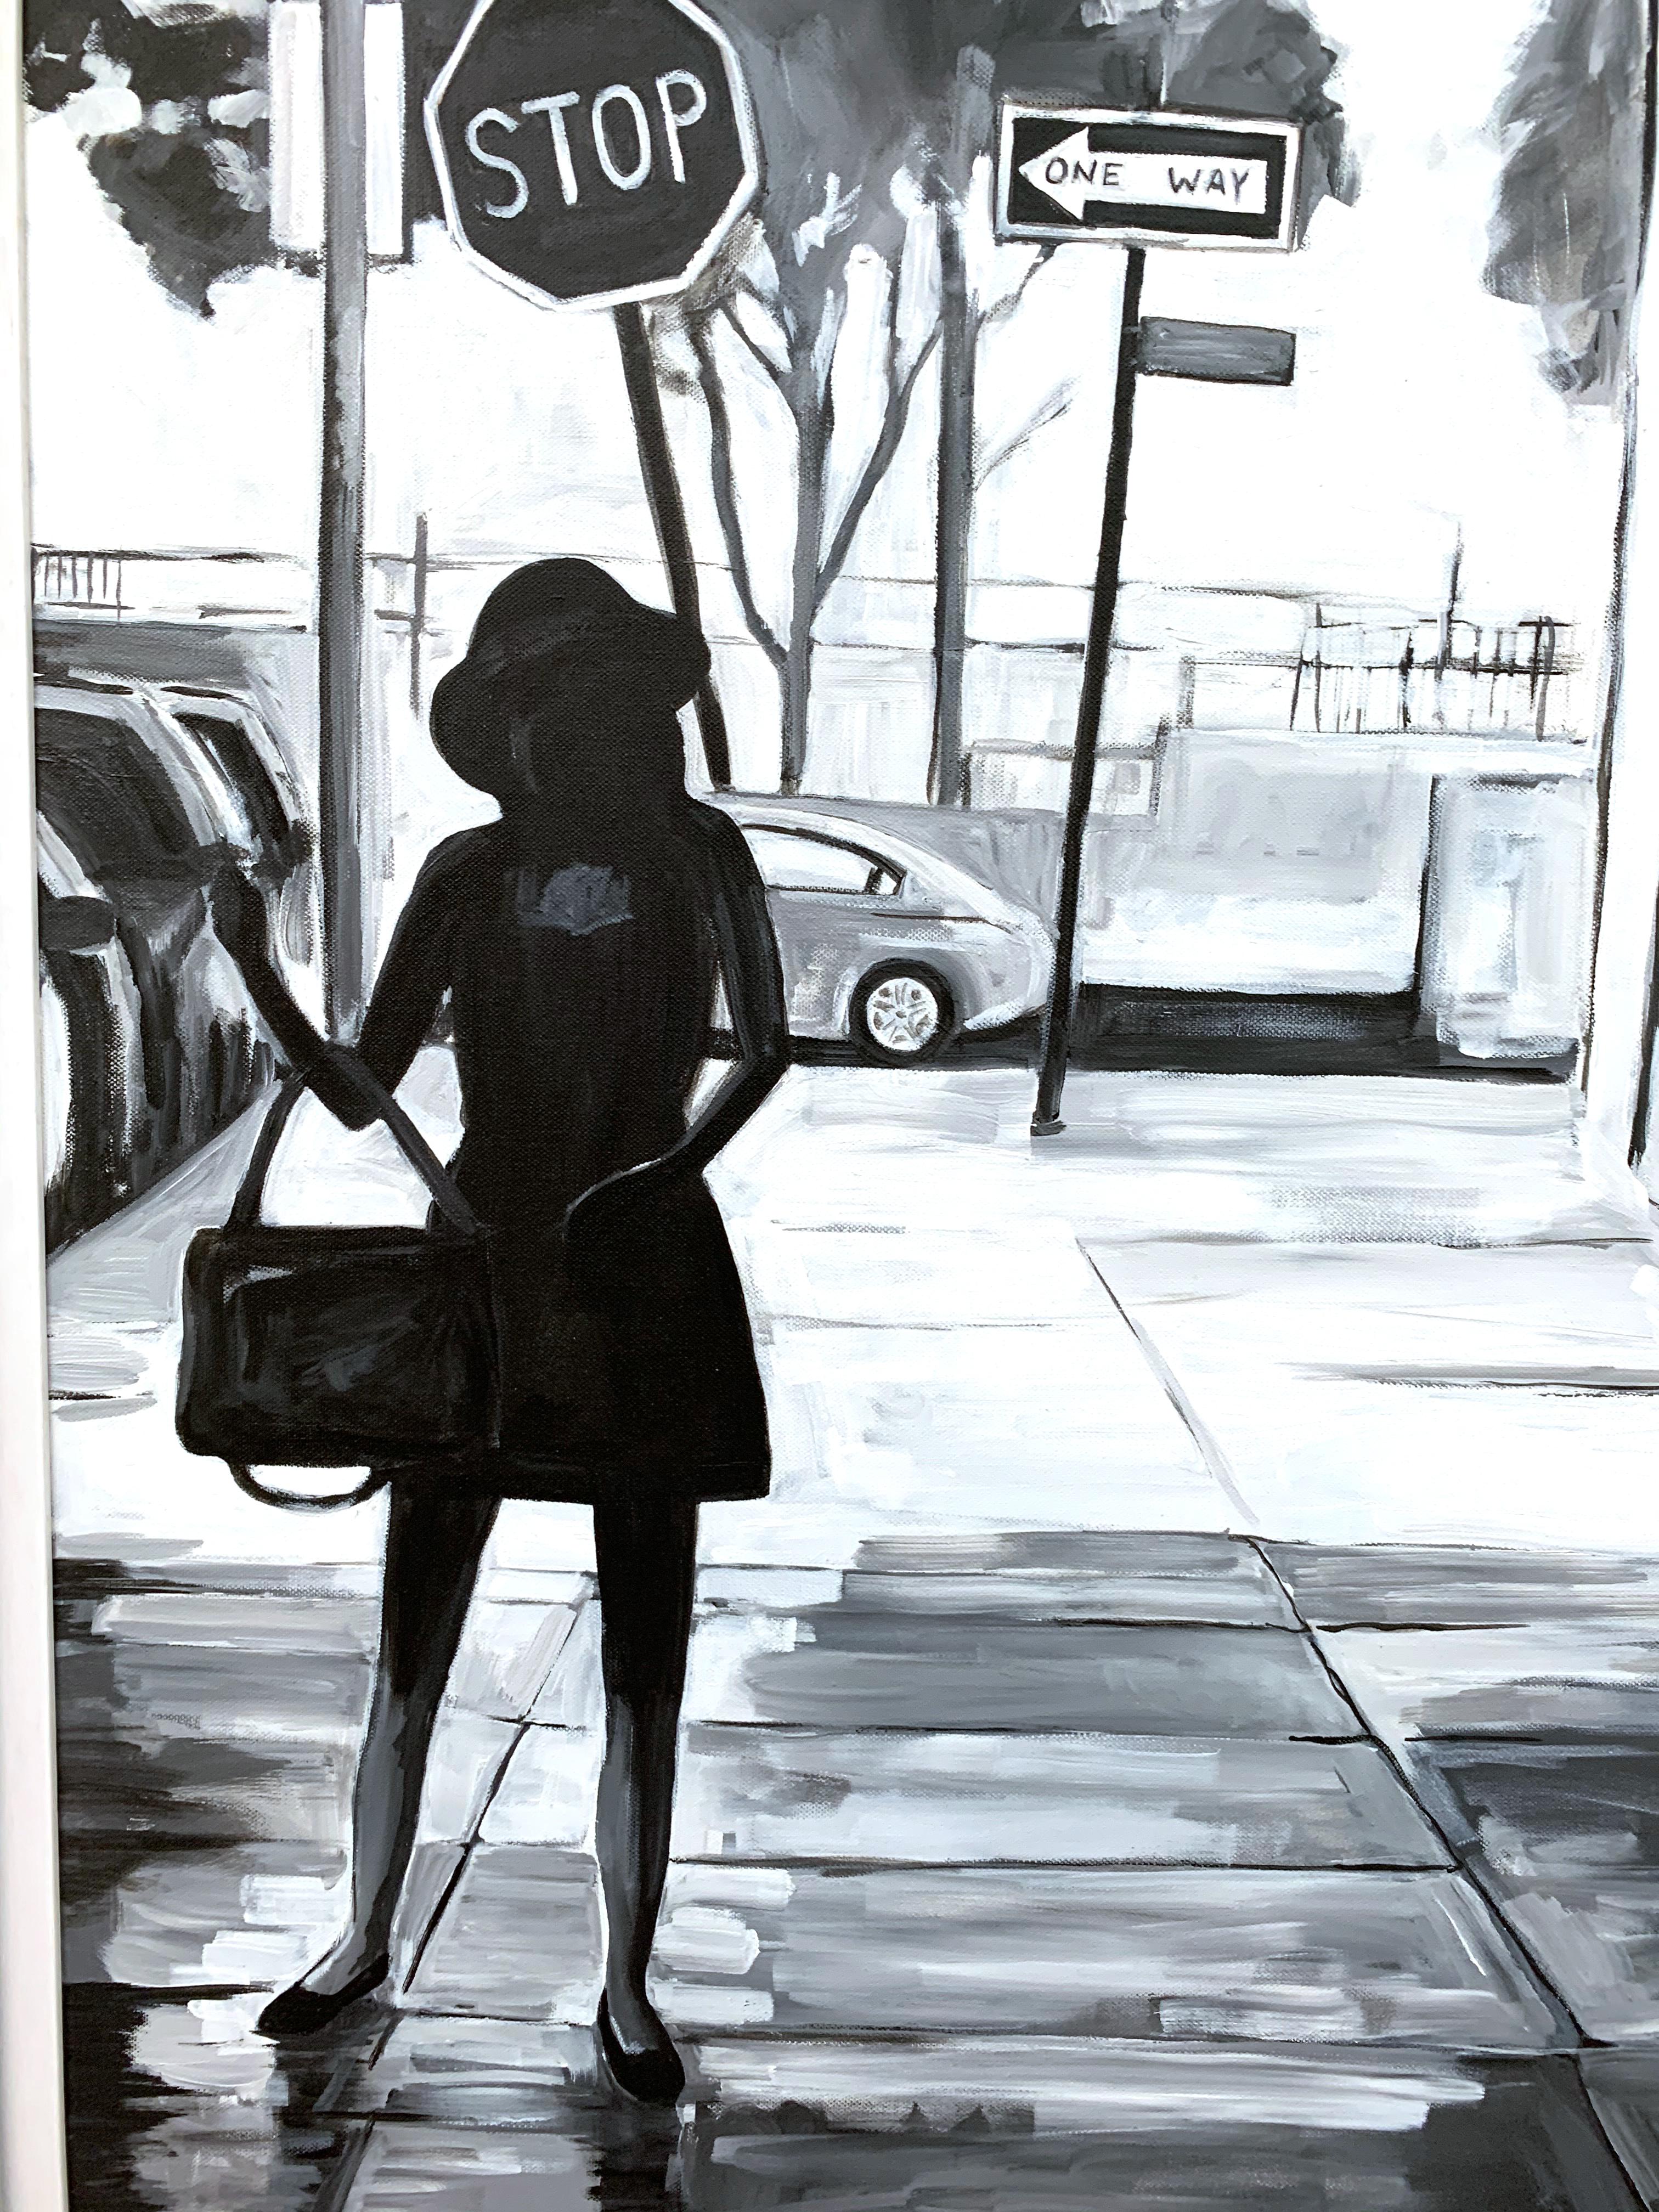 A gritty, black & white urban landscape street scene of a woman in Manhattan, New York by leading British Artist, Angela Wakefield.

Art measures 36 x 36 inches
Frame measures 41 x 41 inches

Angela Wakefield has twice been on the front cover of